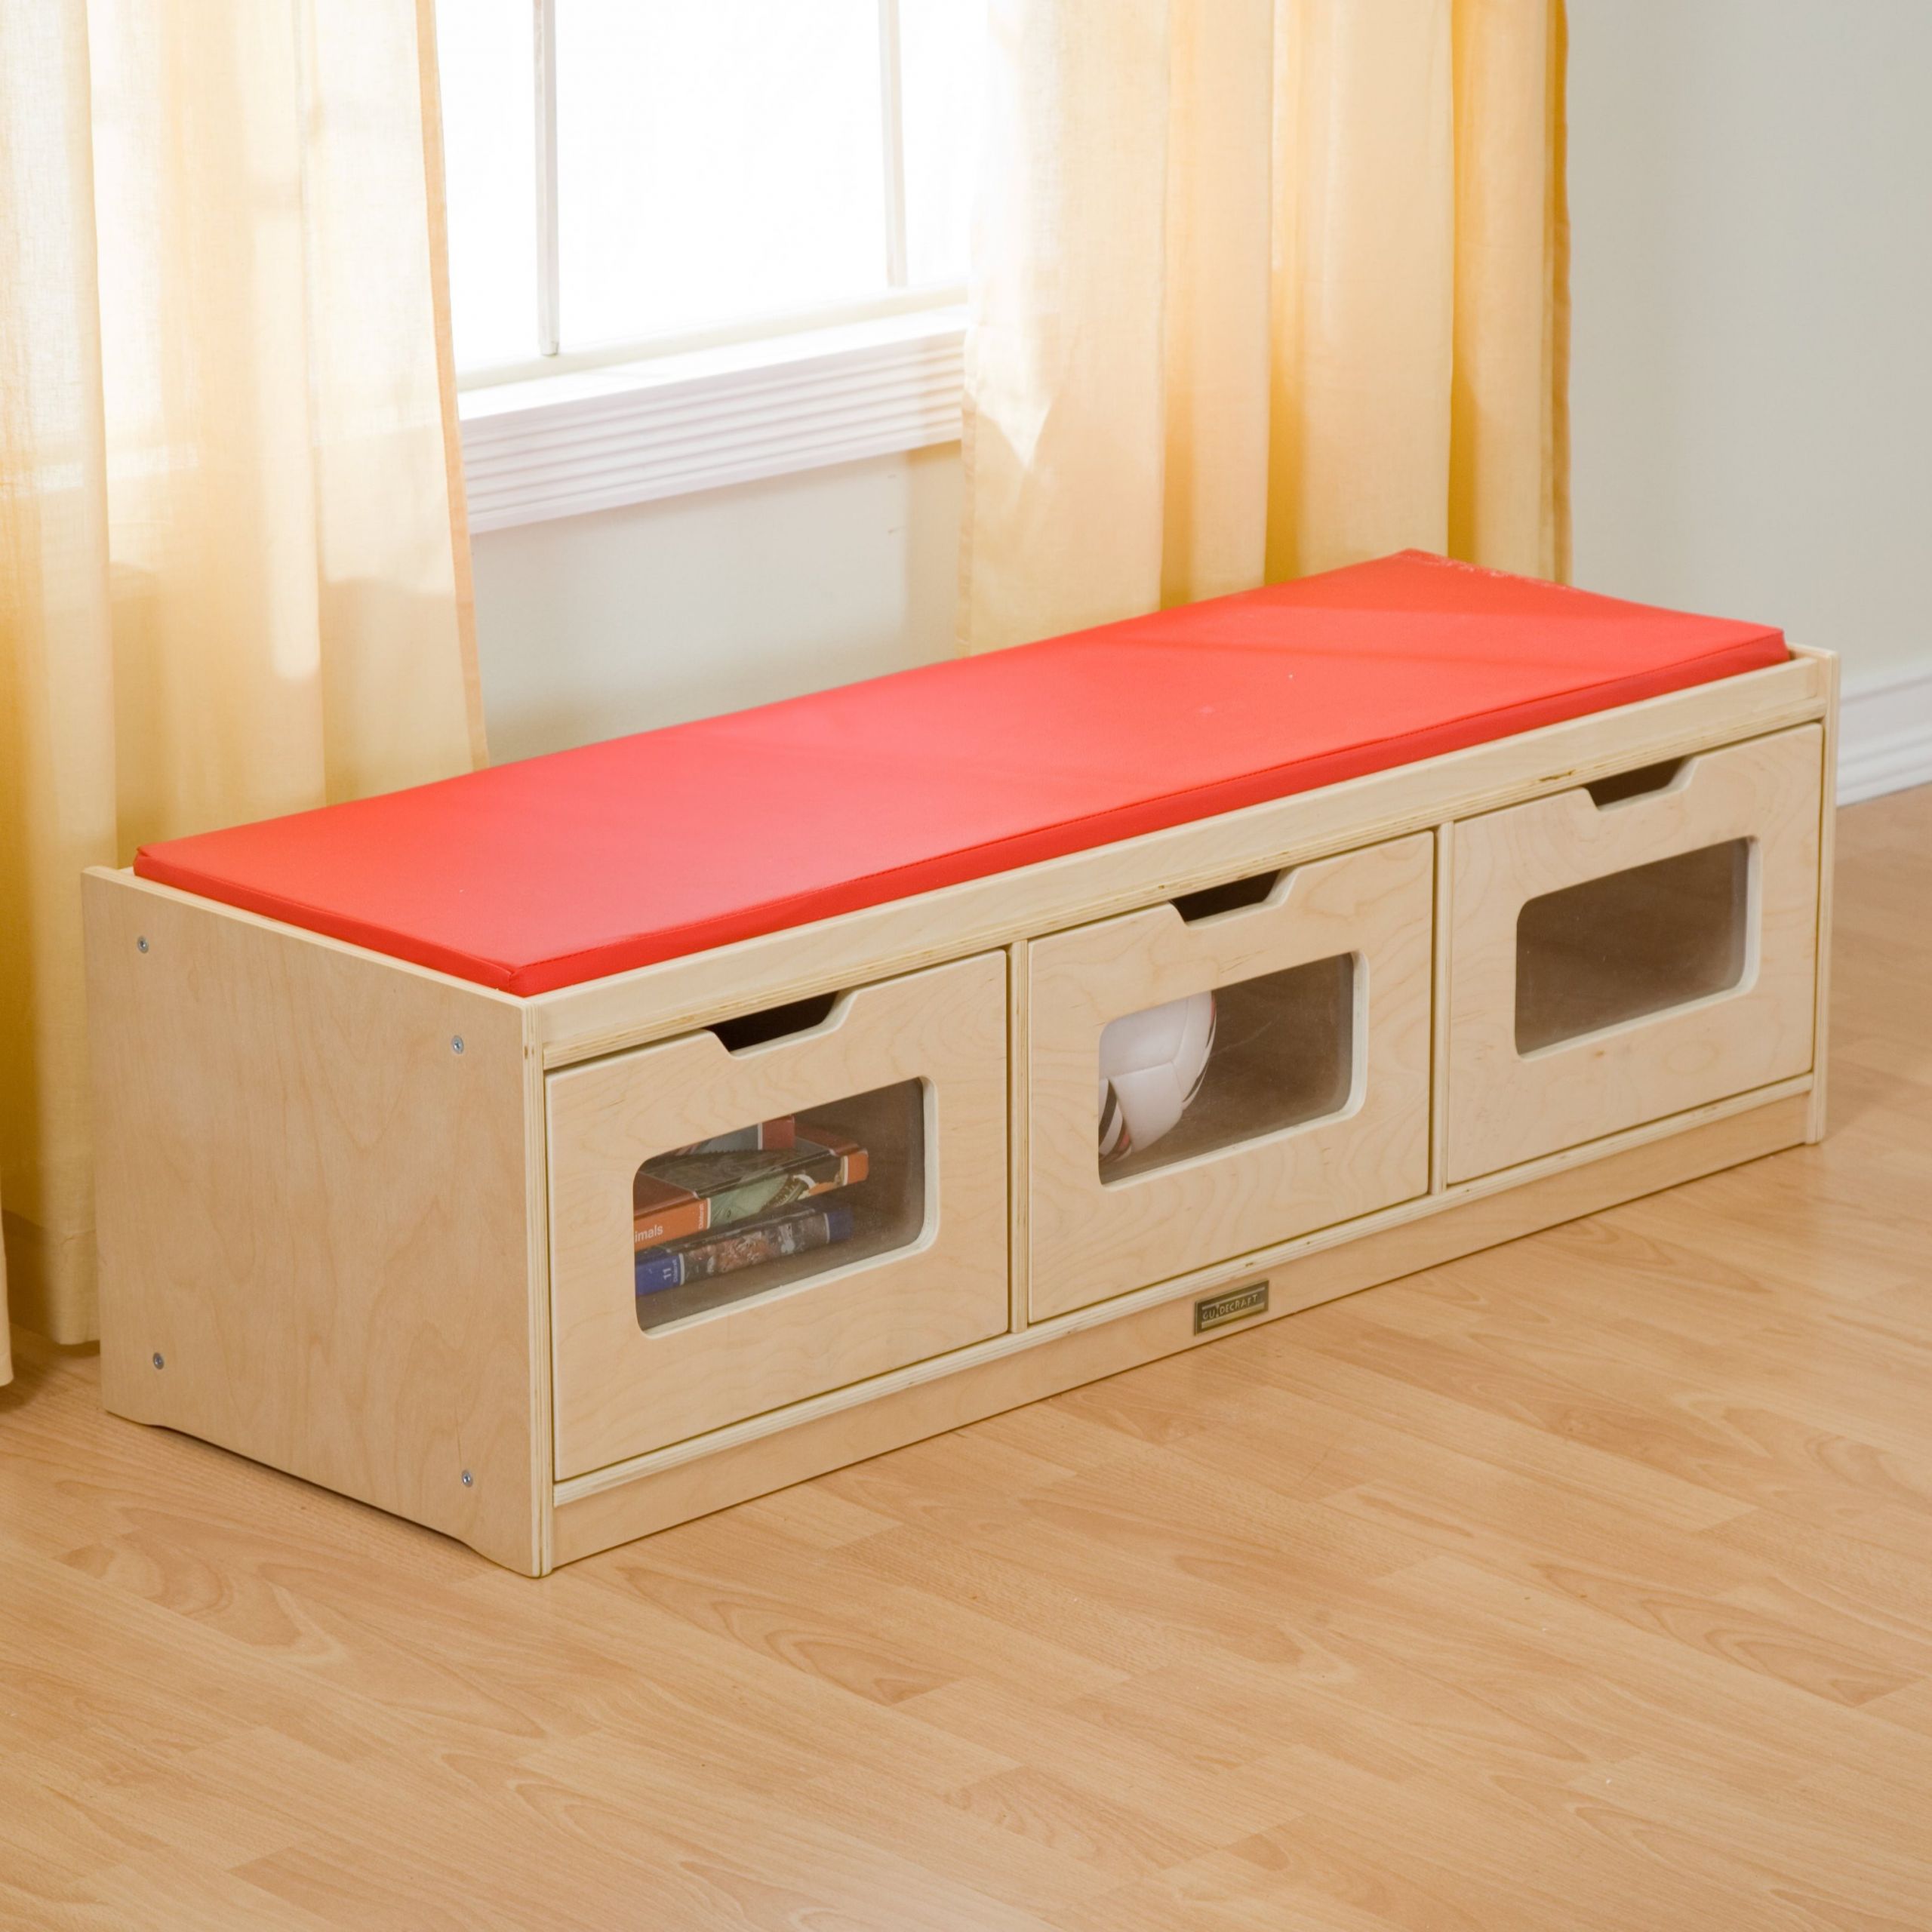 Kids Storage Bench With Cushion
 Long Bench With Storage